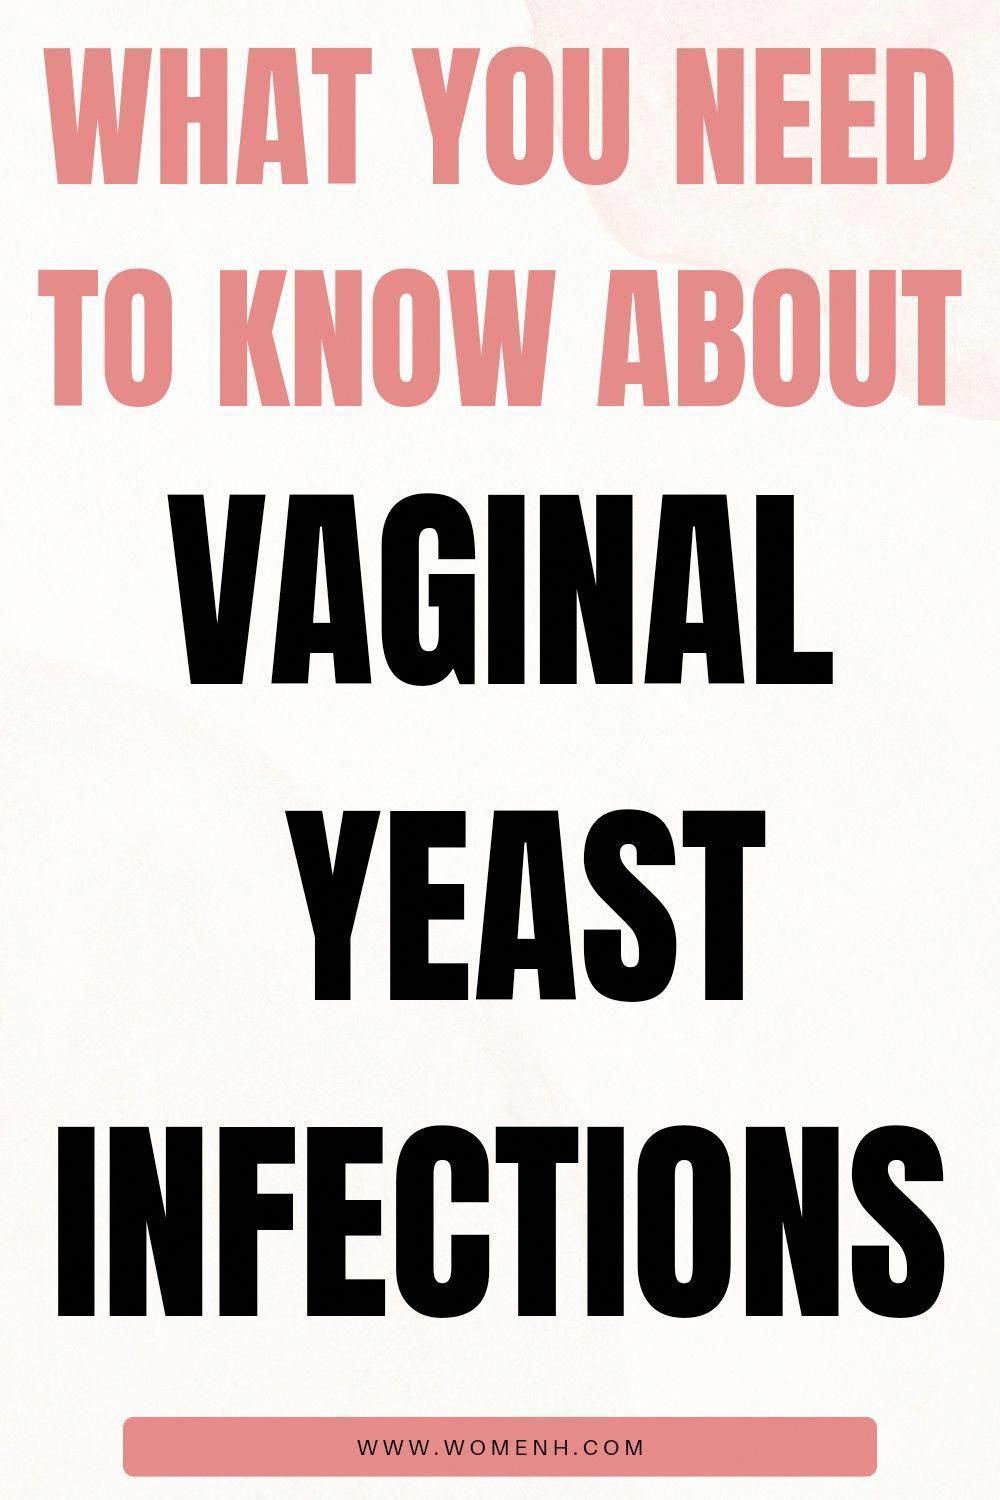 Everything you need to know about vaginal yeast infections